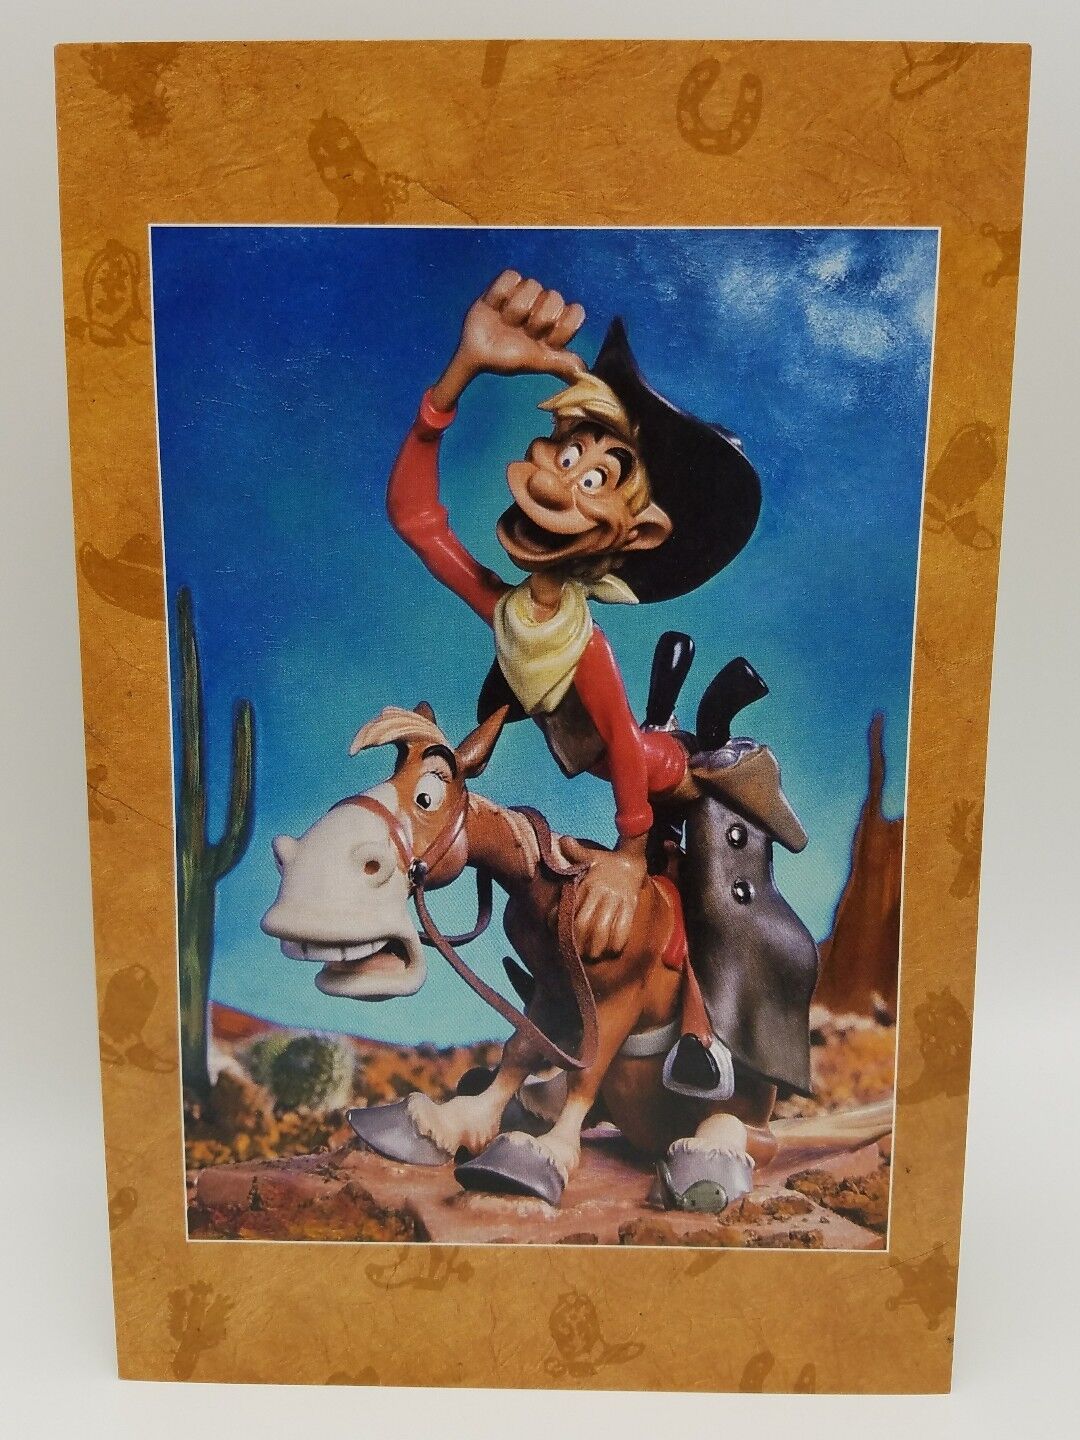 WDCC Disney Pecos Bill Announcement Booklet Pamphlet 5.5 x 8.5 RARE Hard 2 Find